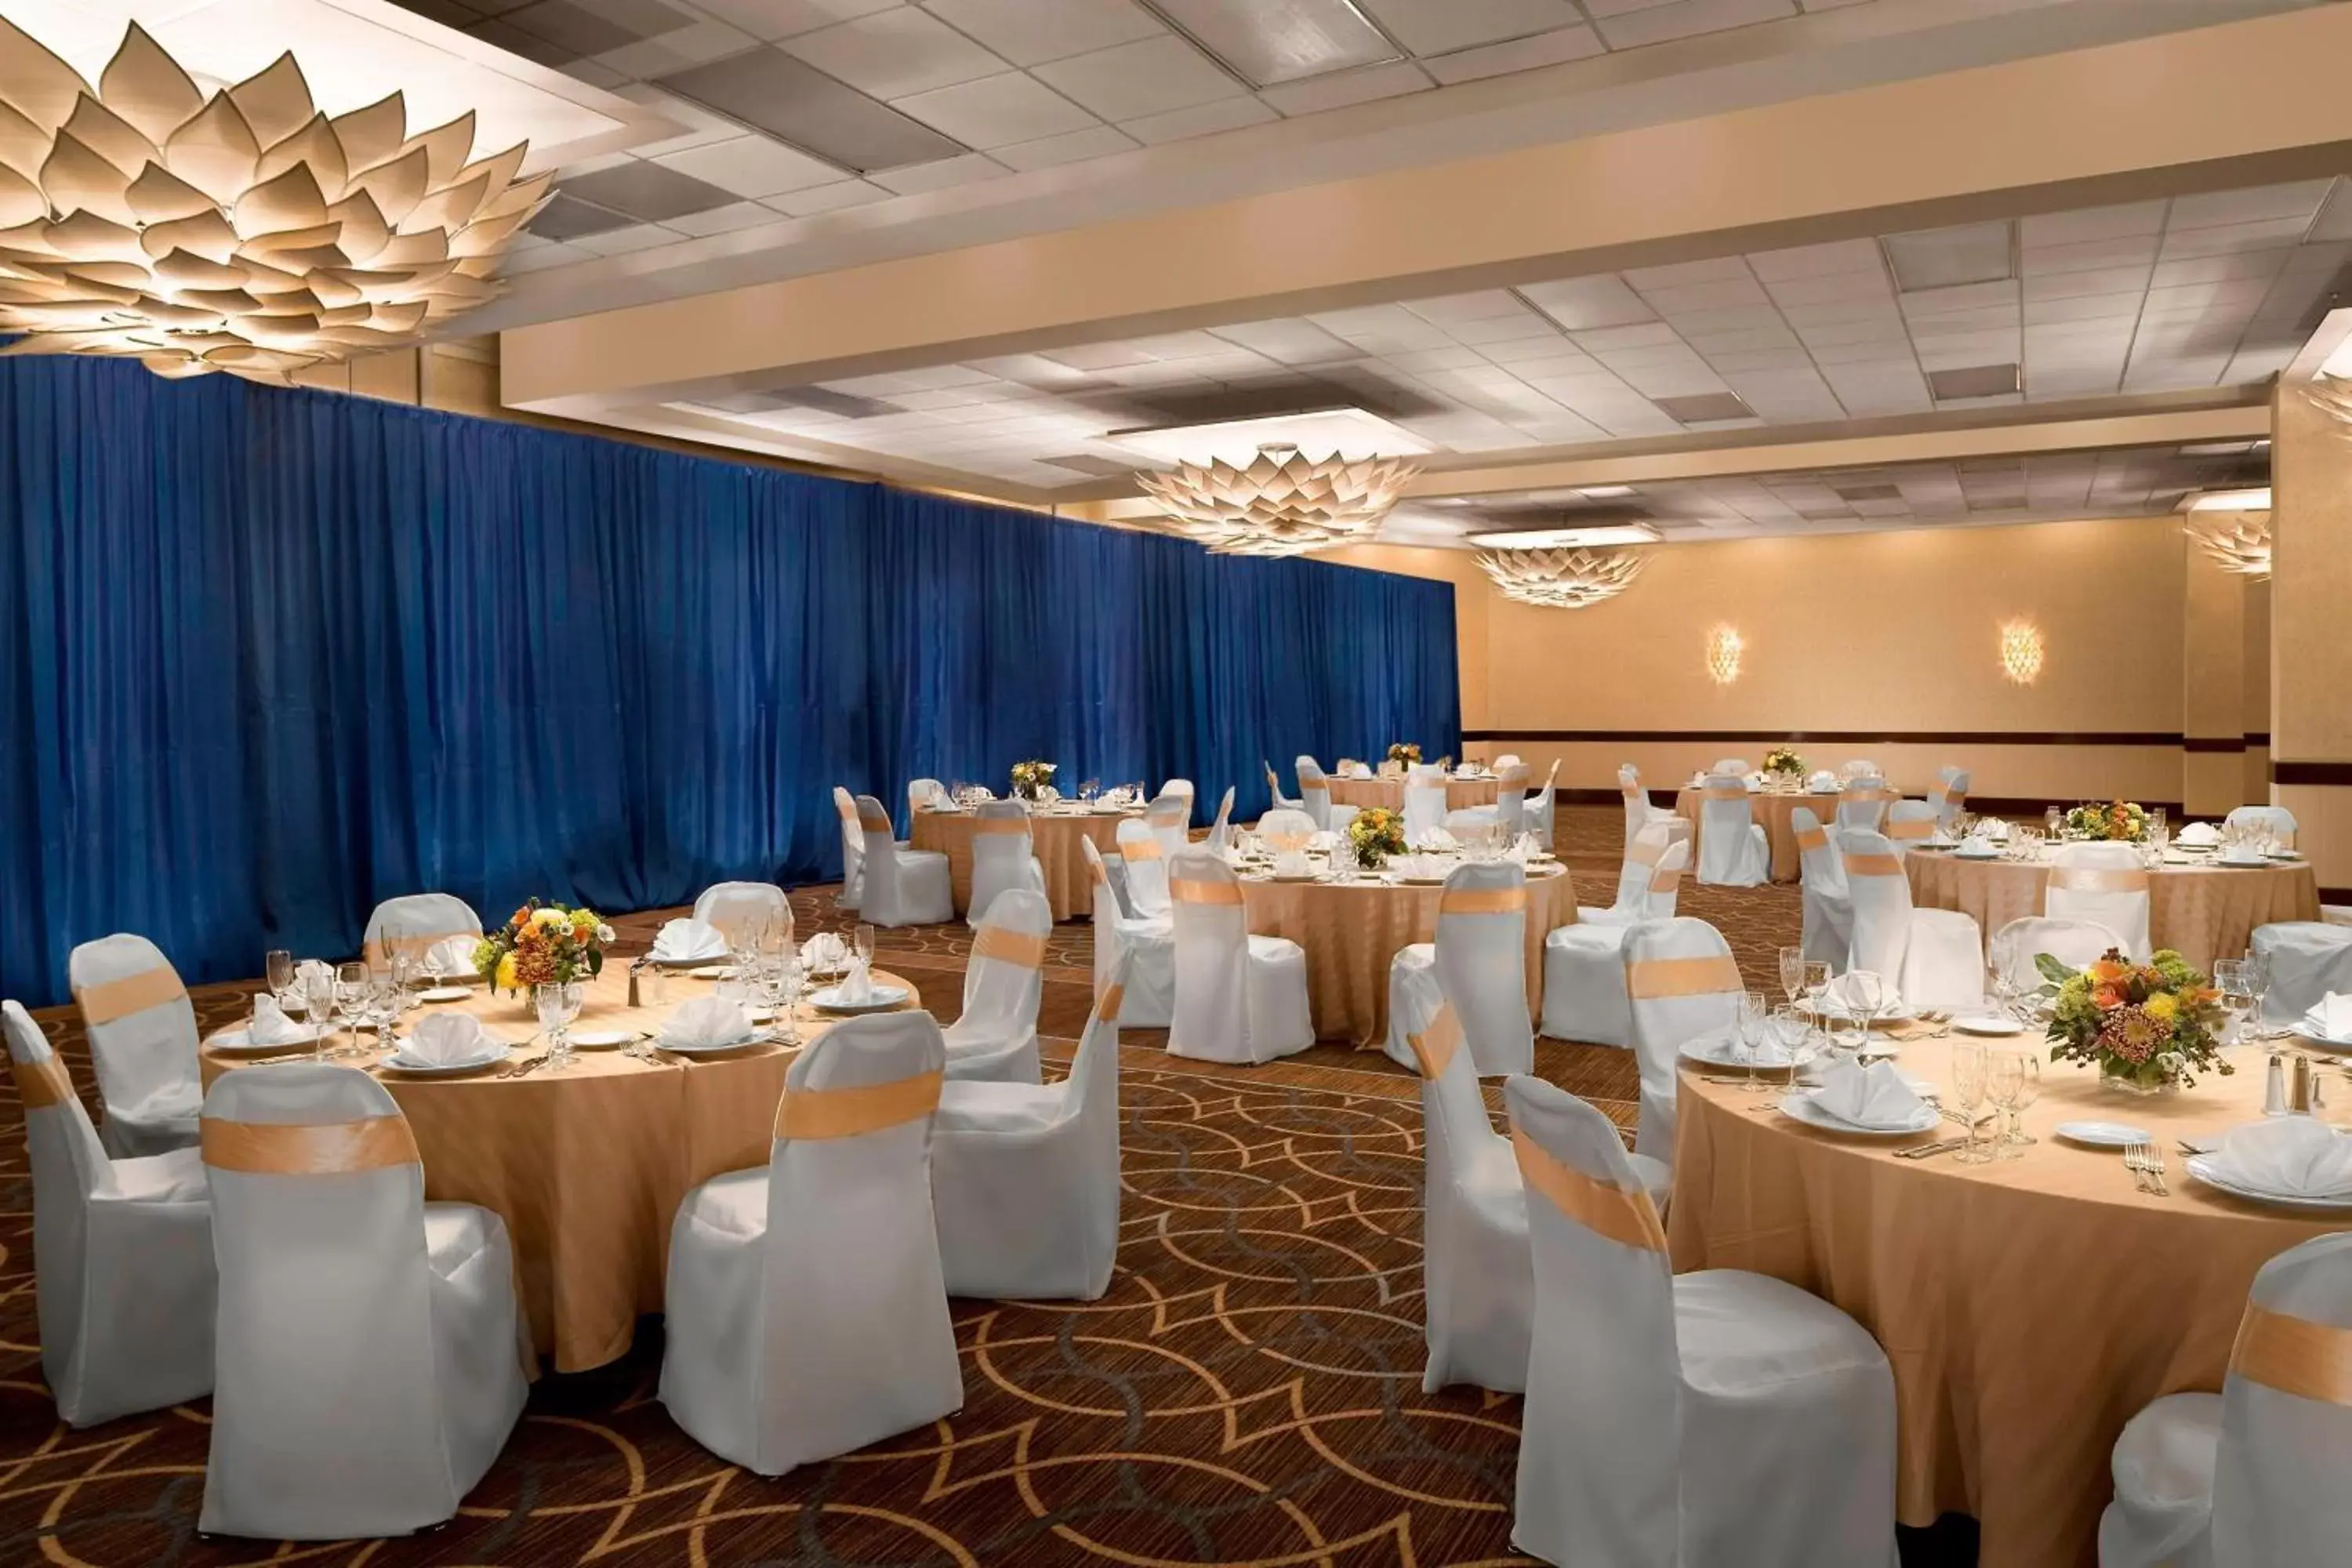 Meeting/conference room, Banquet Facilities in The Stamford Hotel